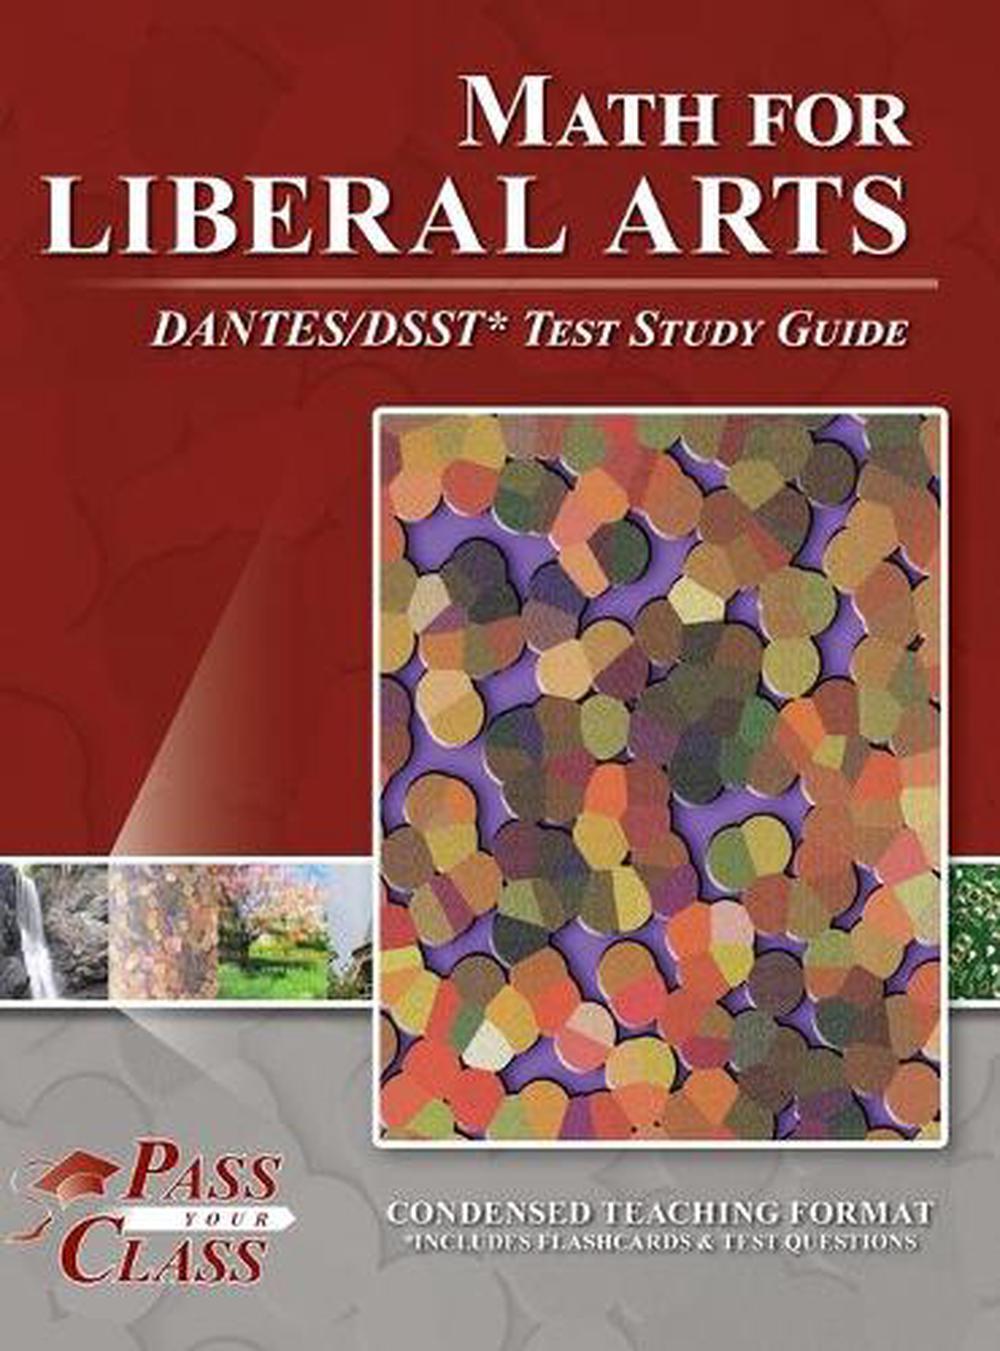 Math for Liberal Arts Dantes/dsst Test Study Guide by